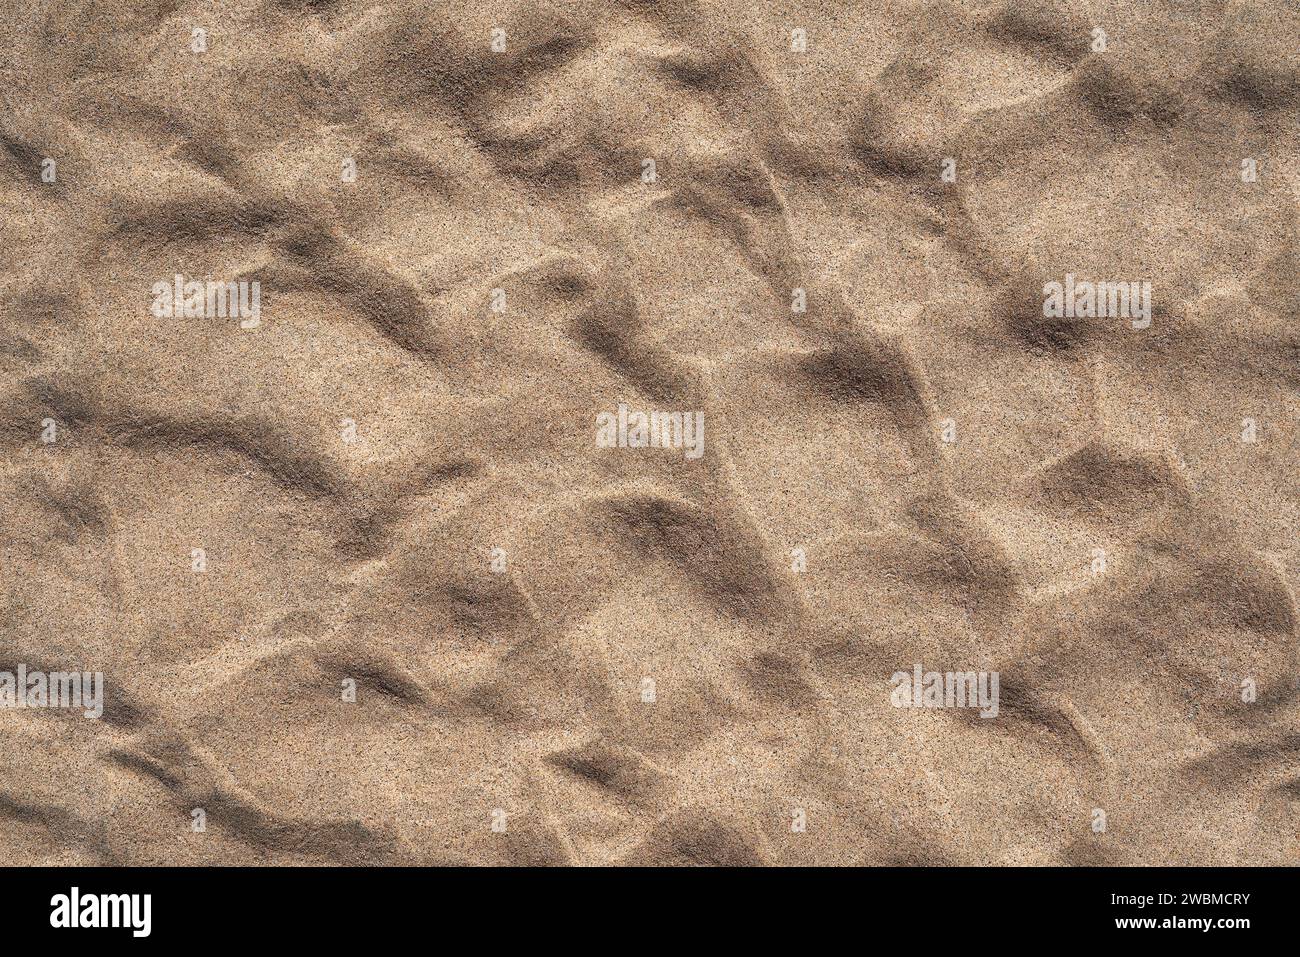 Fine brown sand with relief pattern on a beach in close-up Stock Photo